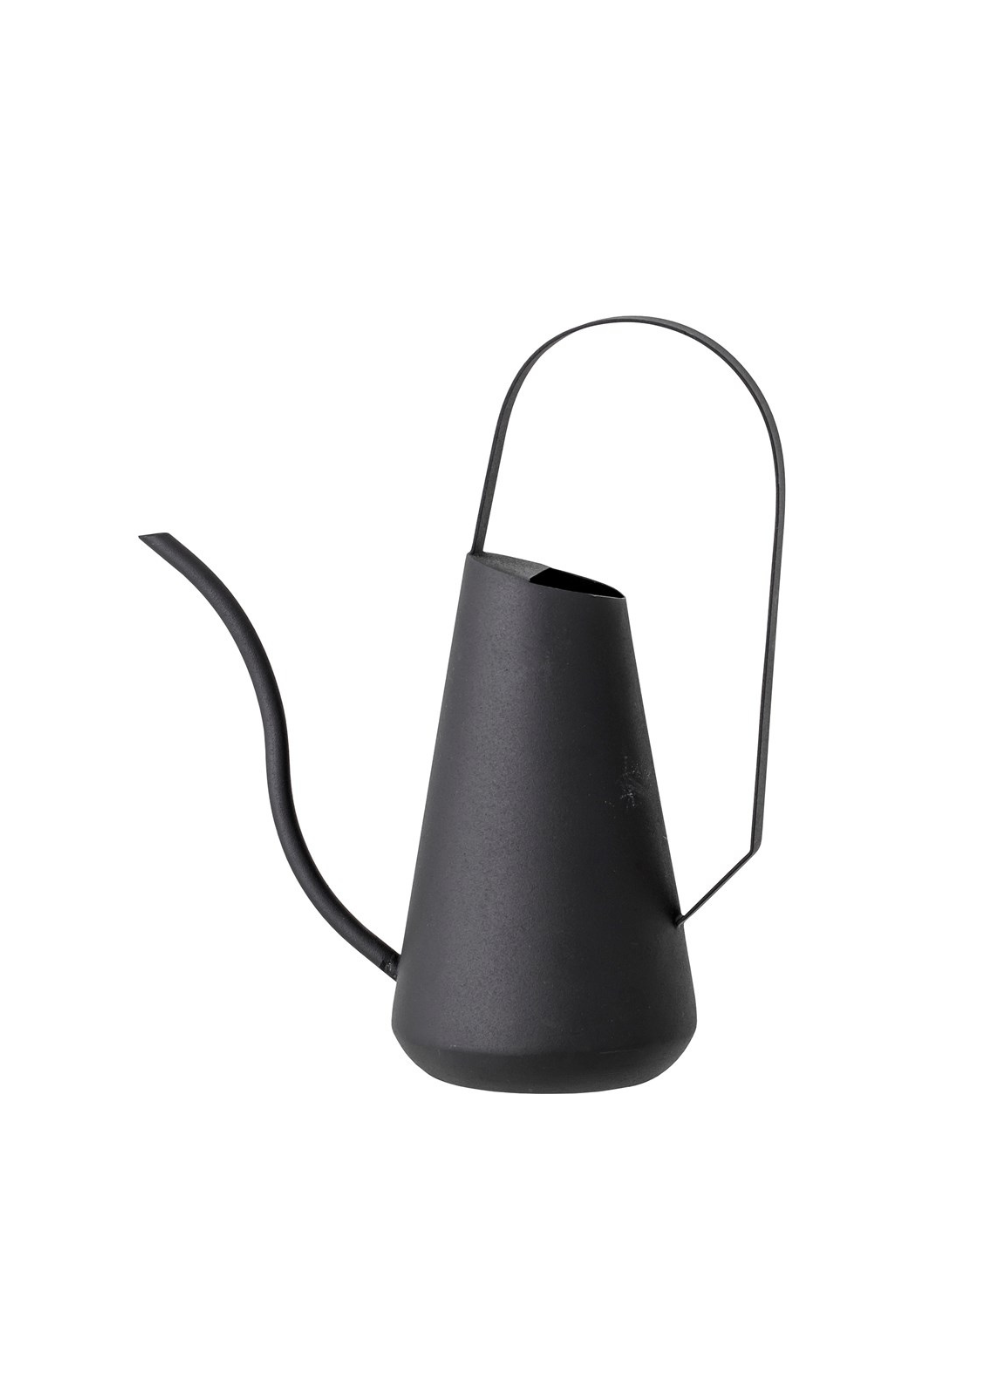 holly watering can - black